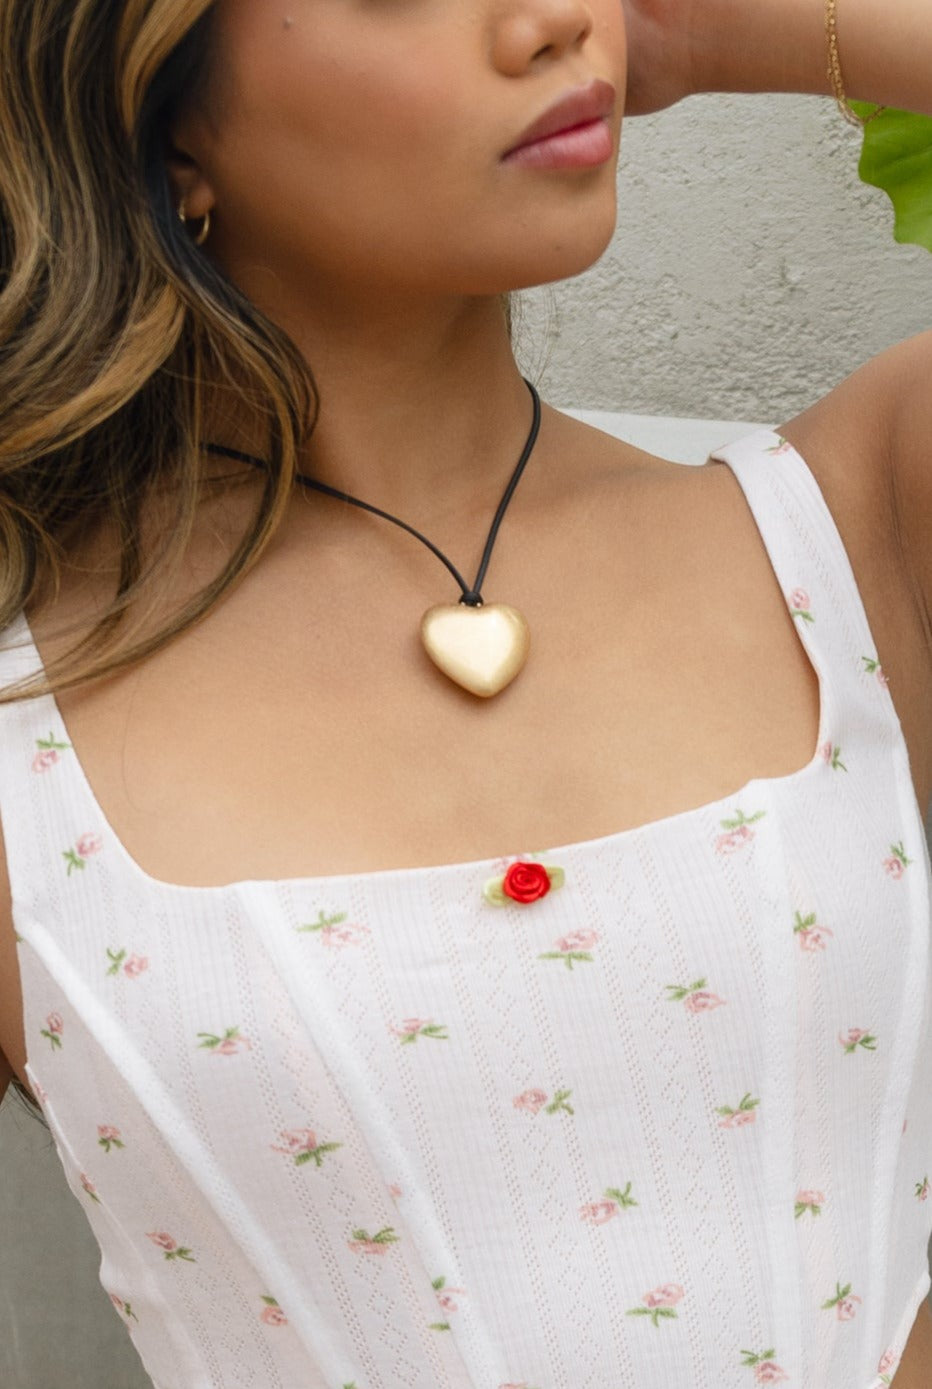 Heart Cord Necklace